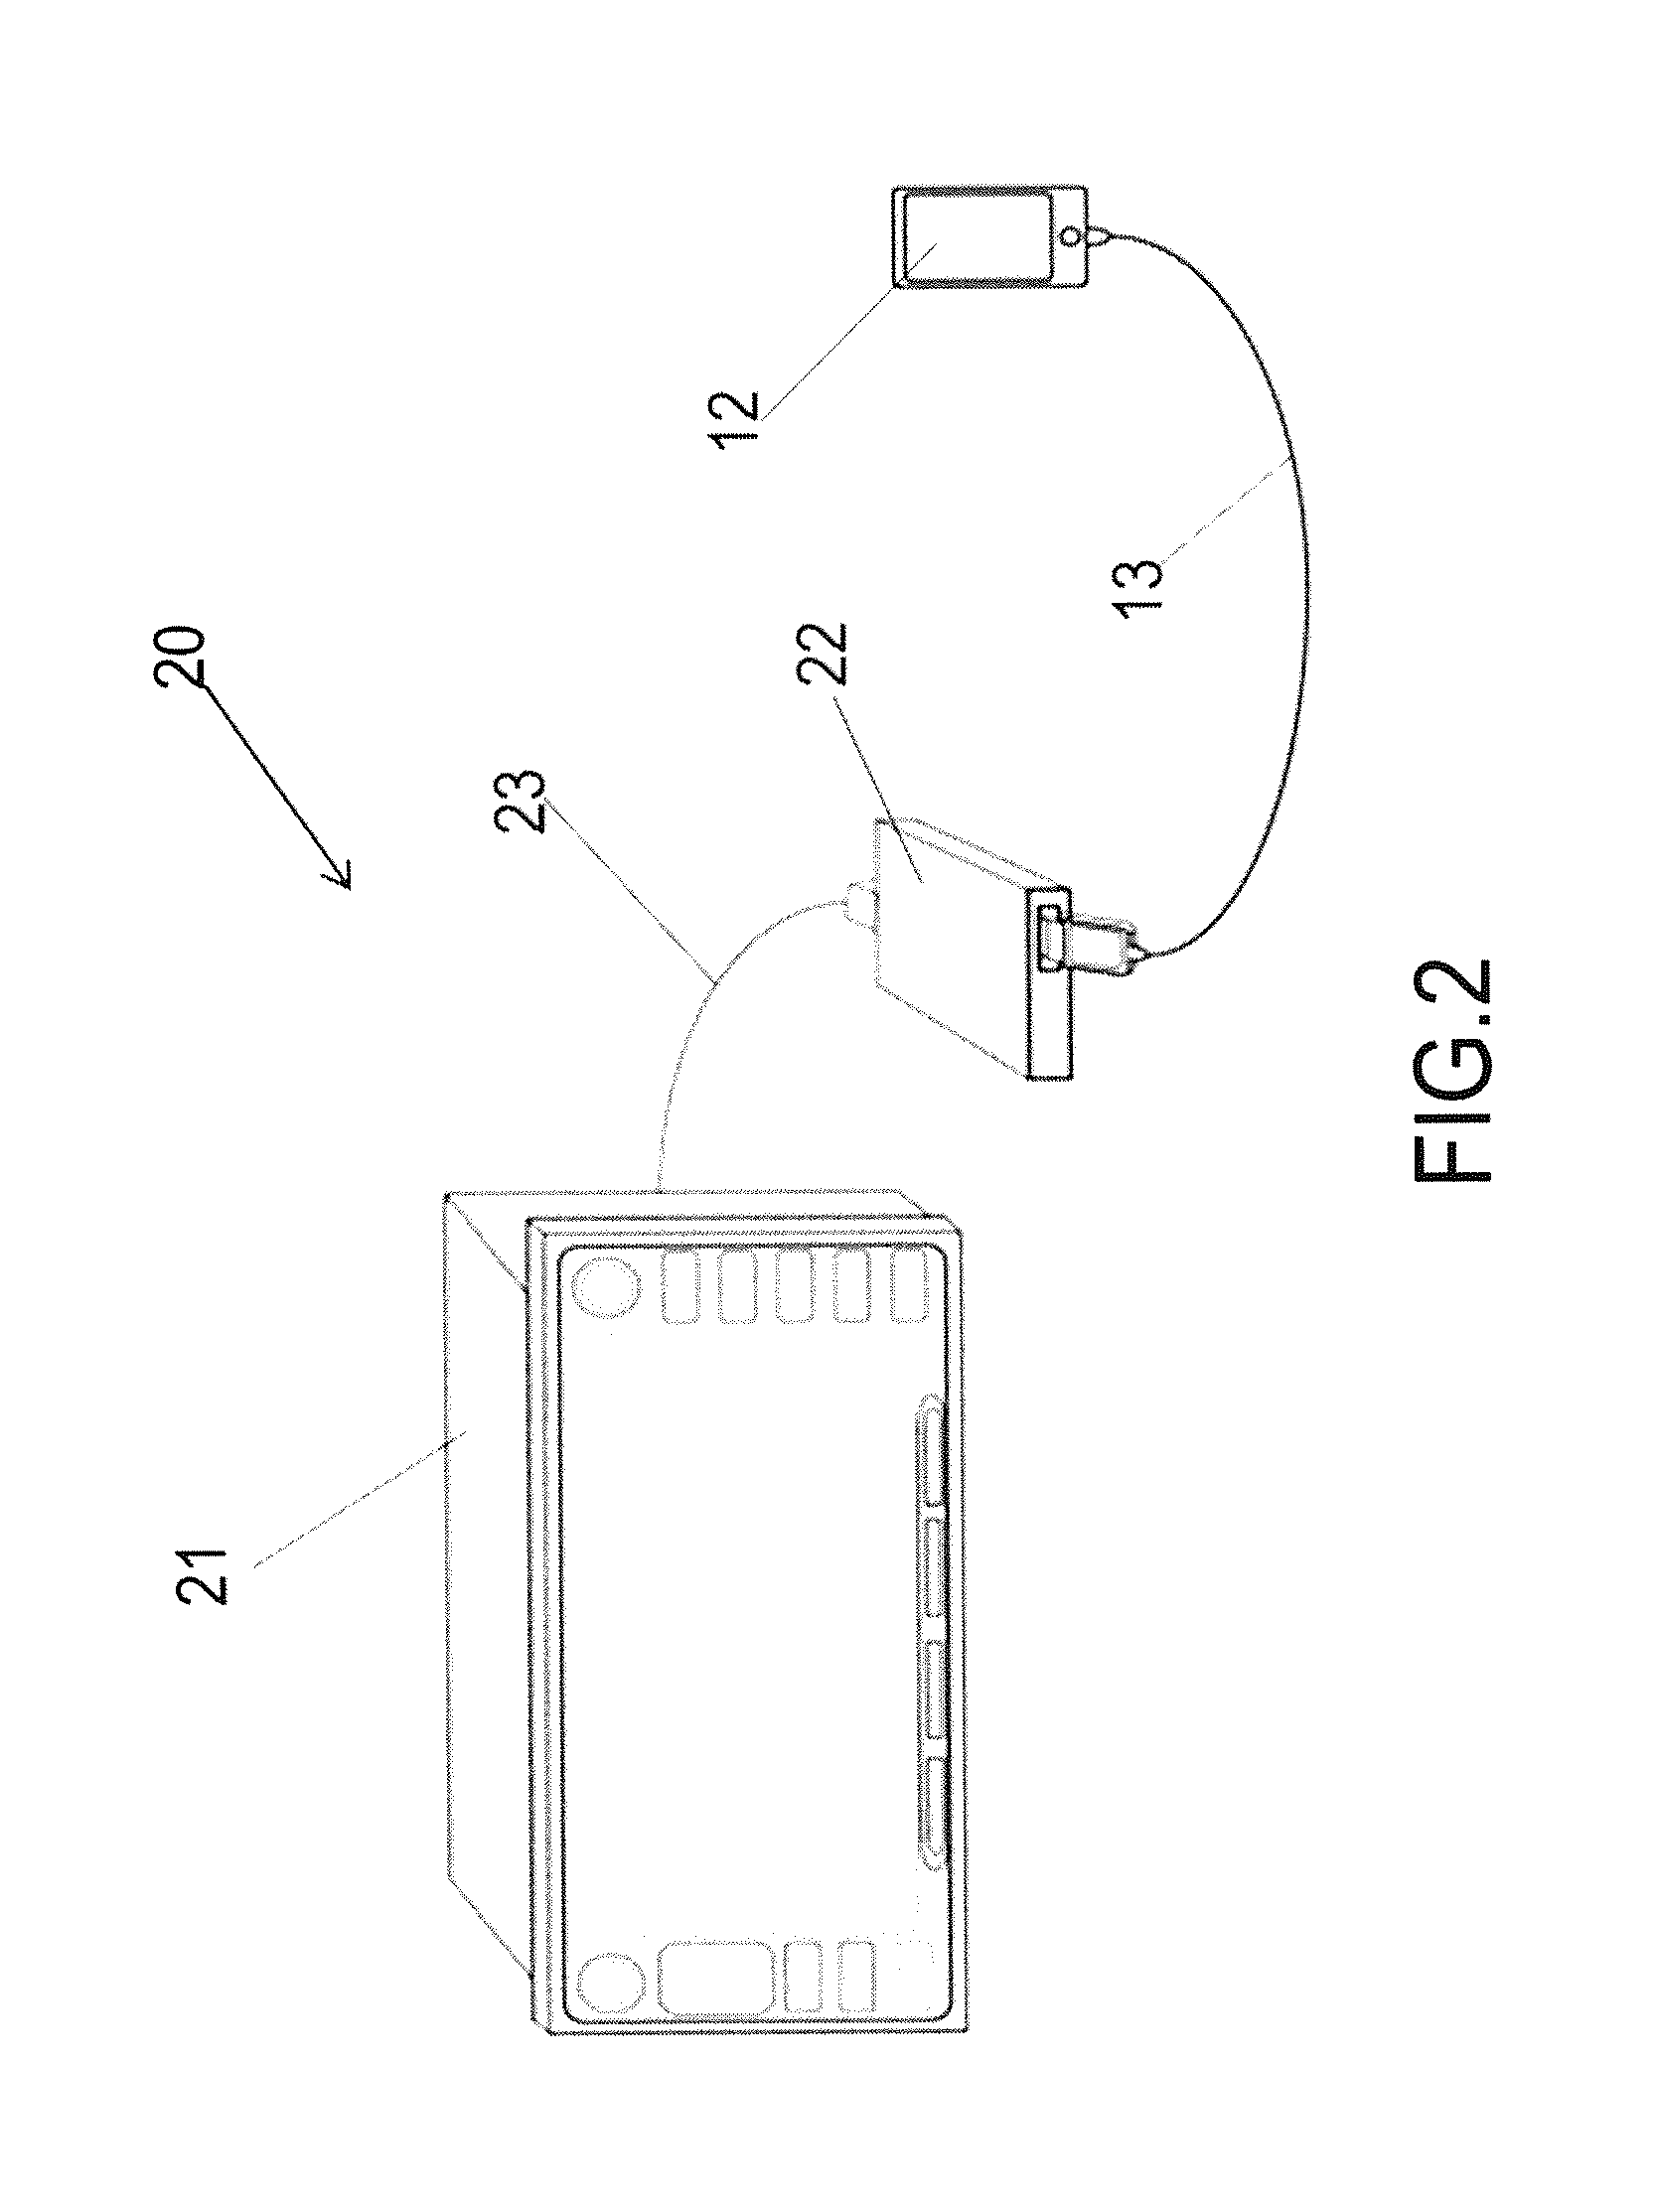 Application matching method for mobile device and accessory method